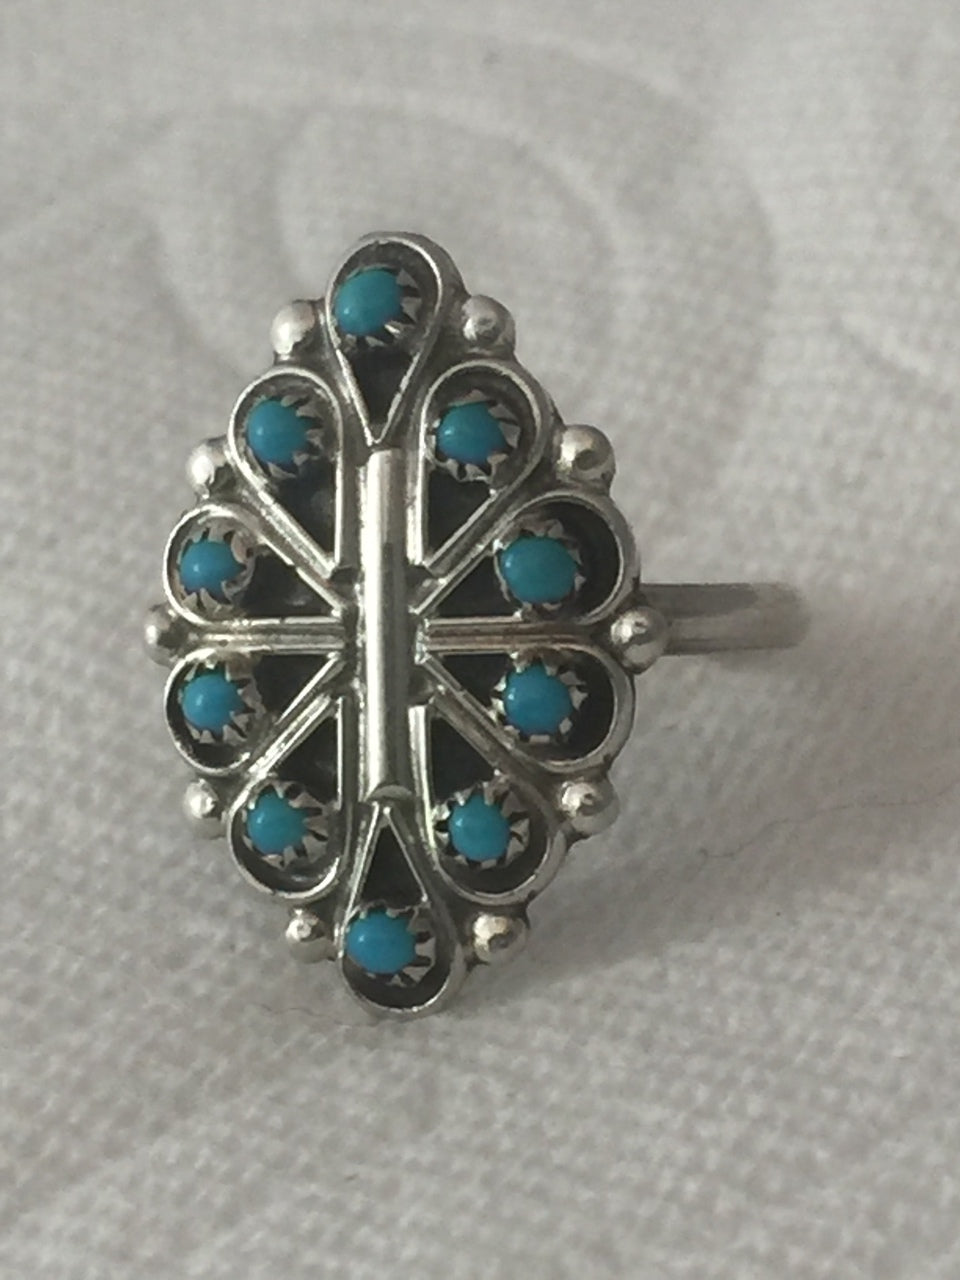 Zuni Turquoise Ring Vintage Sterling Silver Native American Size 7 